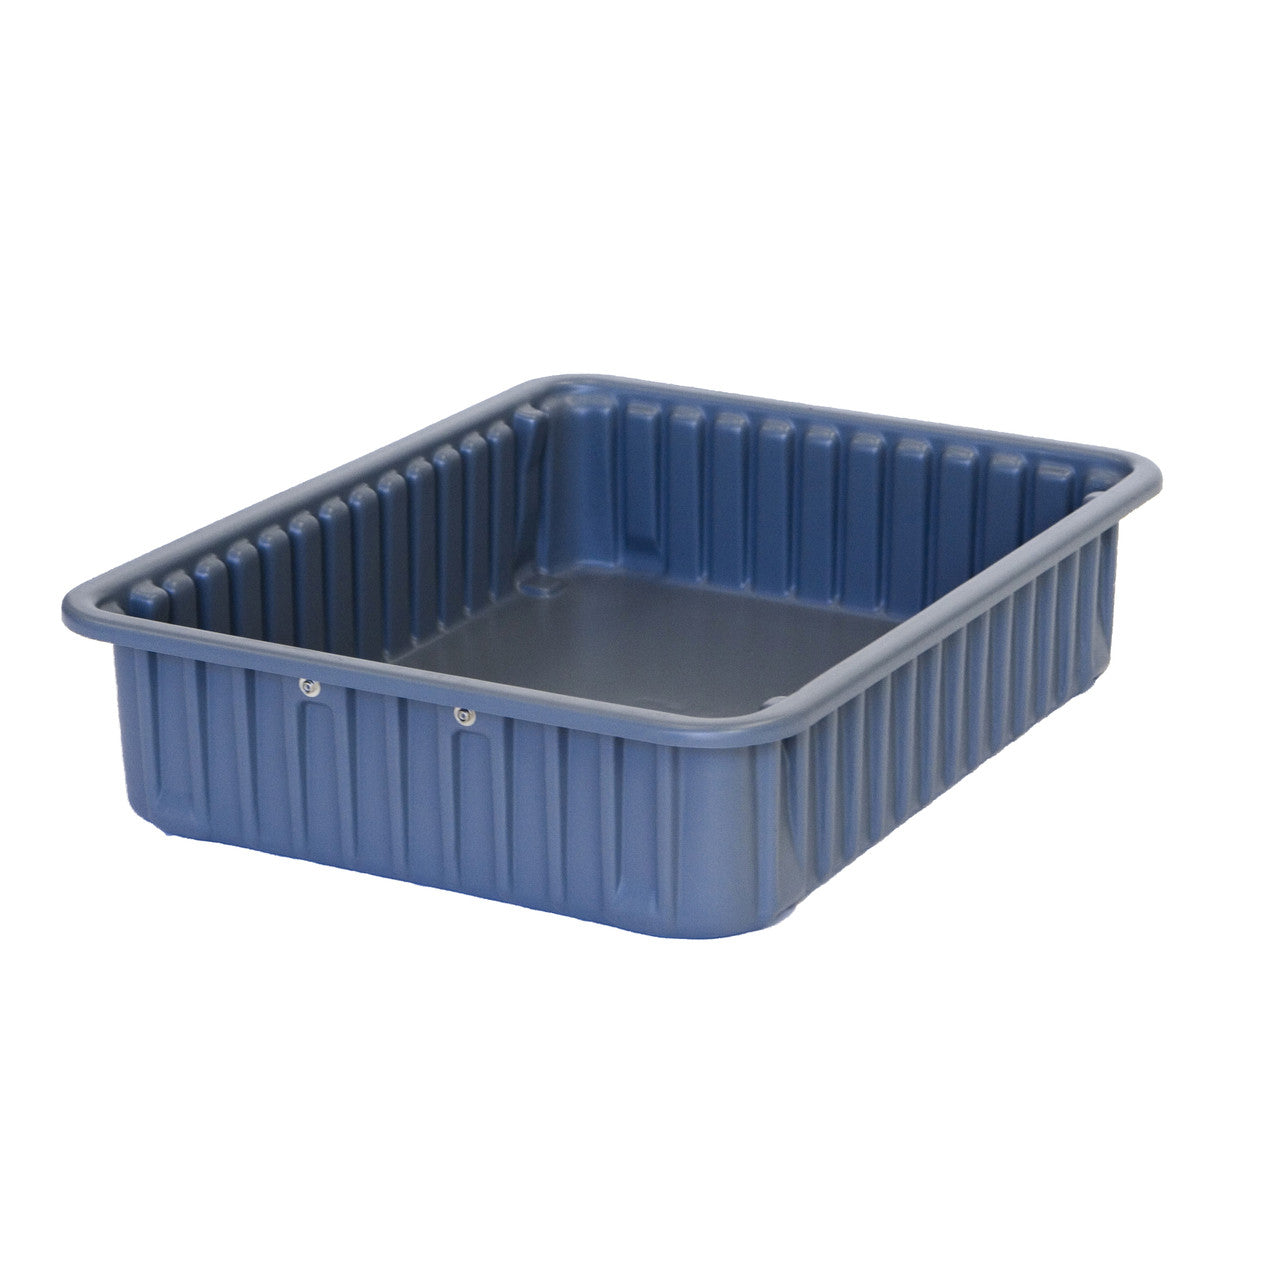 5? Square Shallow Plastic Container - MBC Express